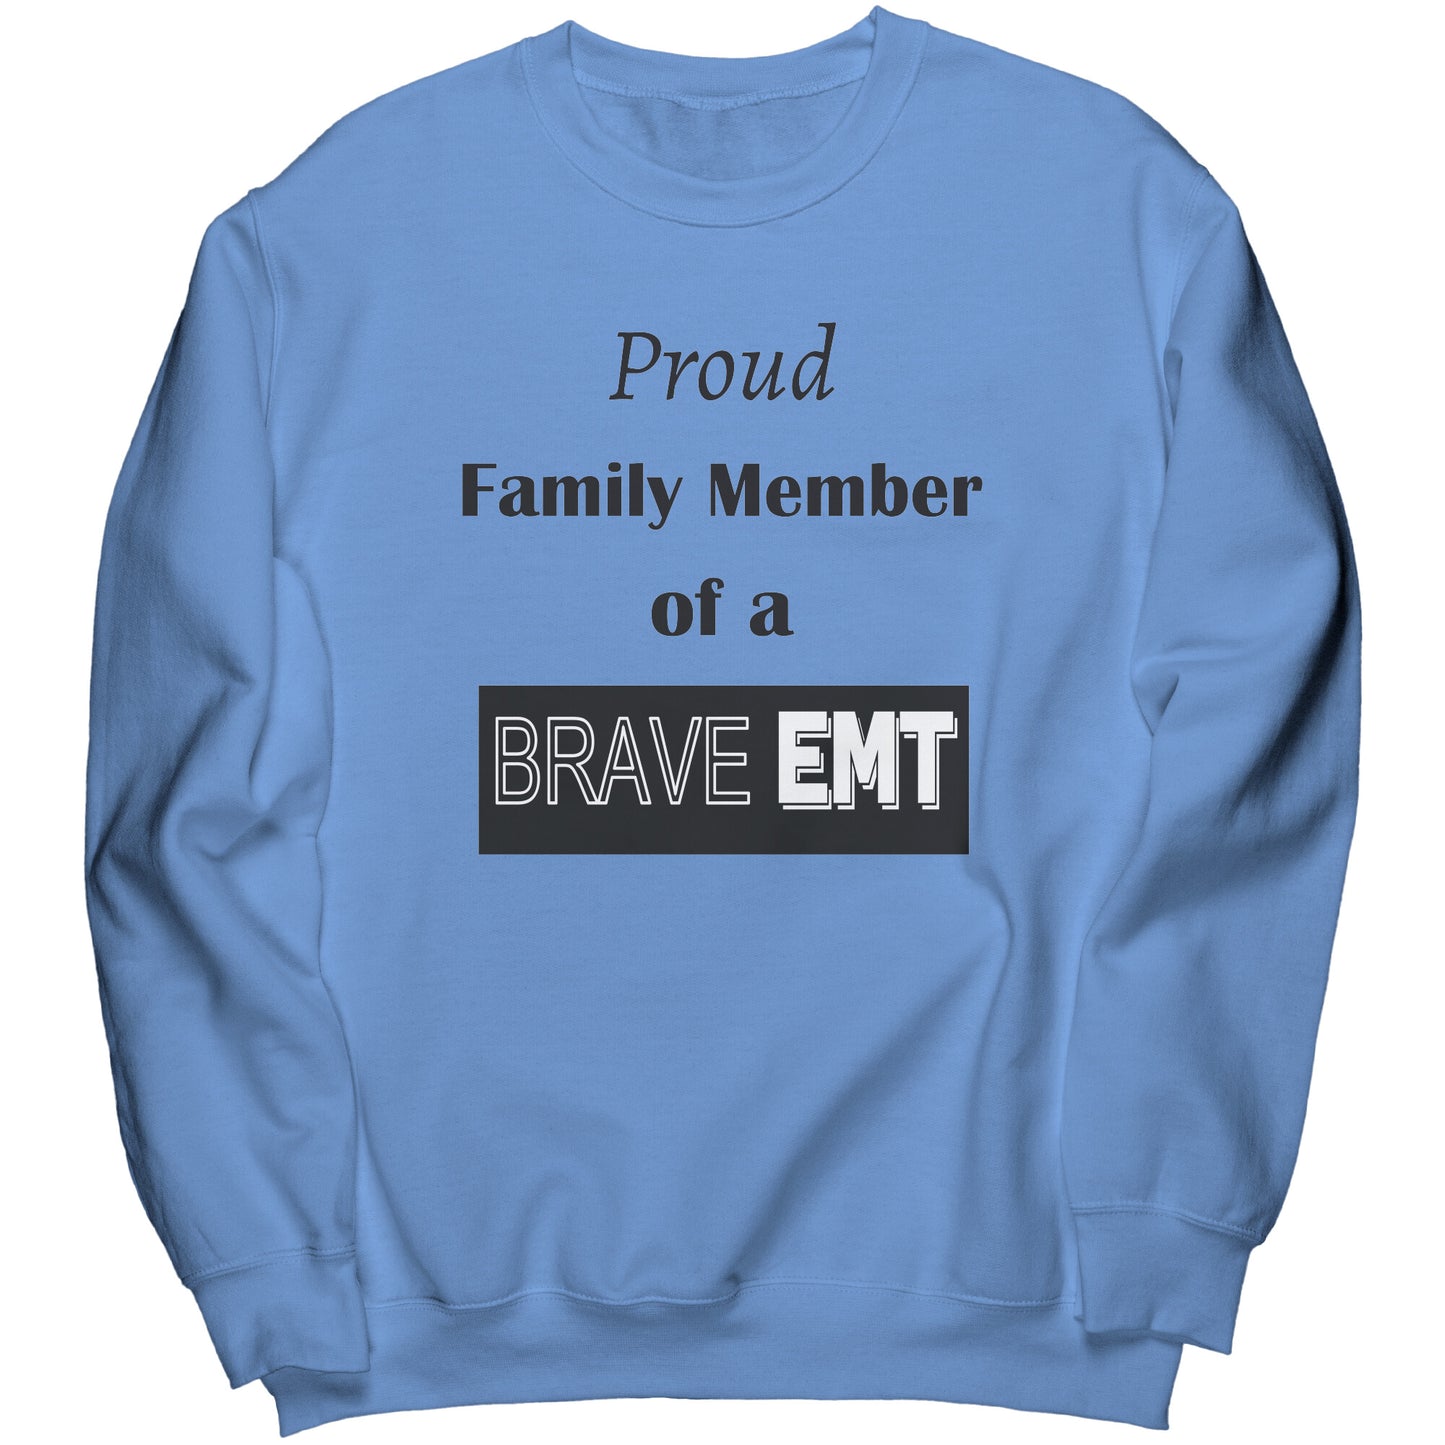 Proud Family Member of a Brave EMT Lettering Sweatshirt - Signs and Seasons Gifts